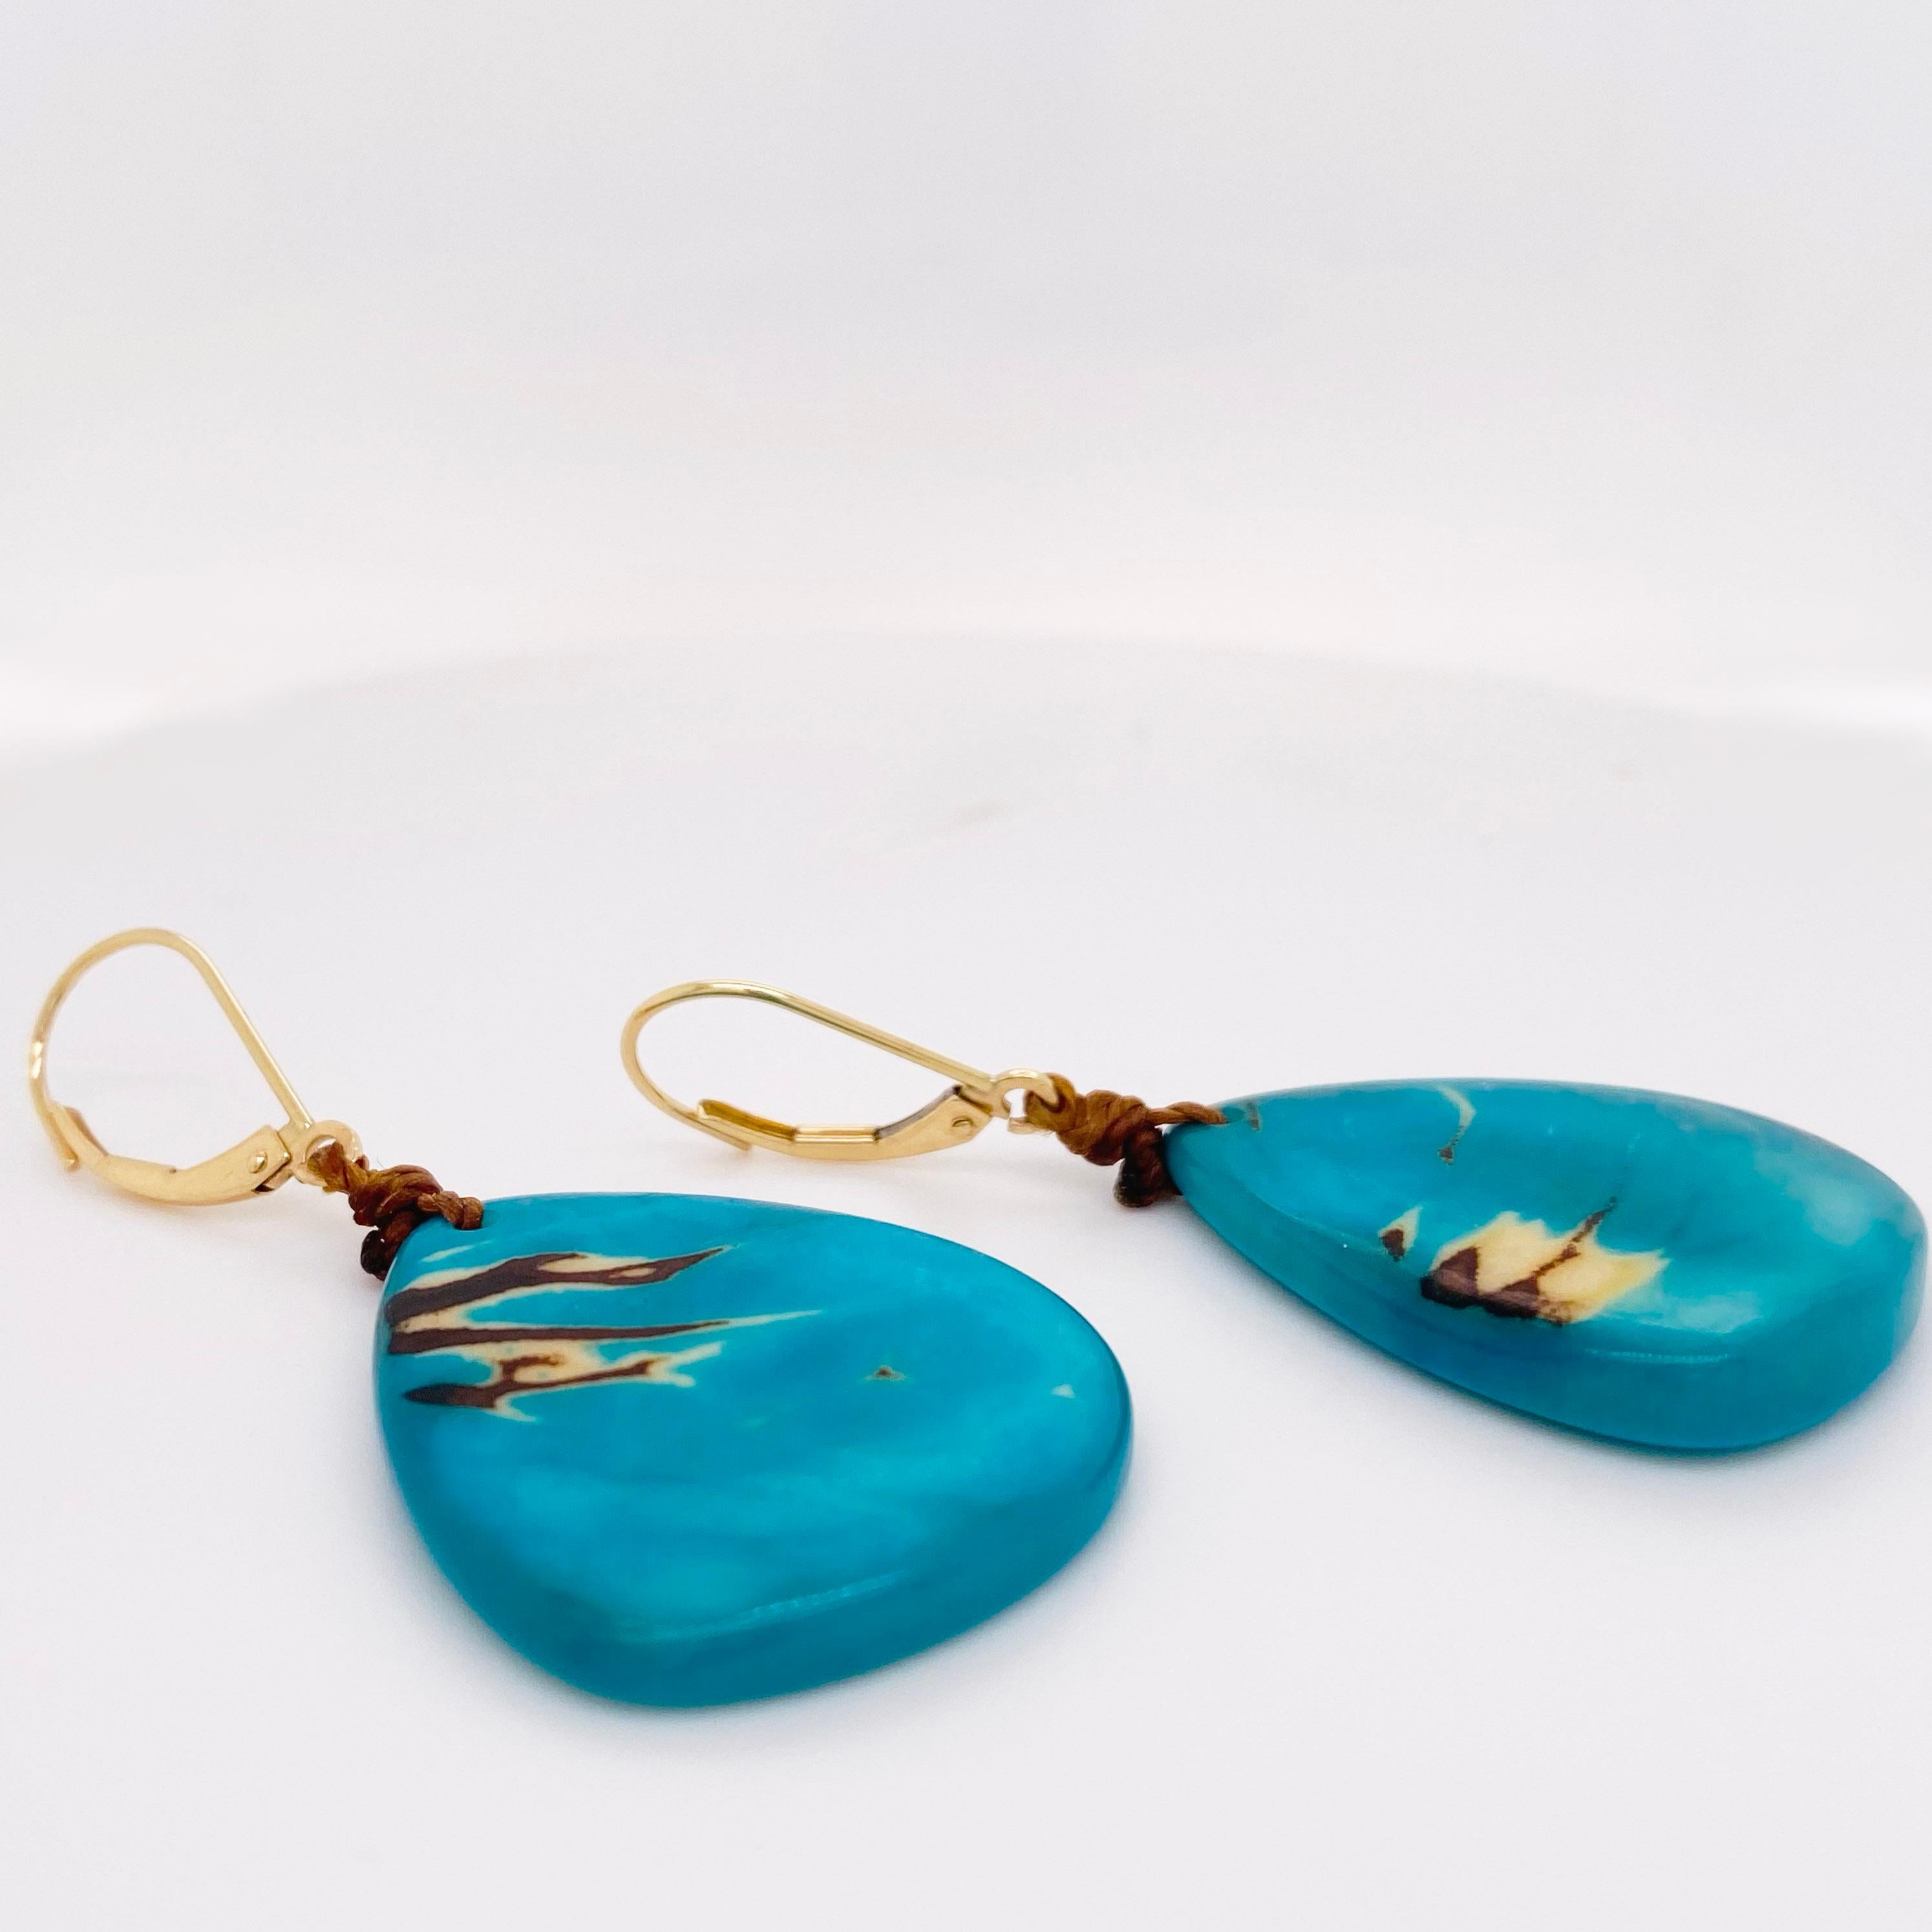 These turquoise nut dangle earrings are perfect with the current fashions. The earring leverbacks are solid 14 karat yellow gold and the dangle is a palm tree nut from the Ecuador rainforest and is eco-friendly and sustainable. The nut has been hand